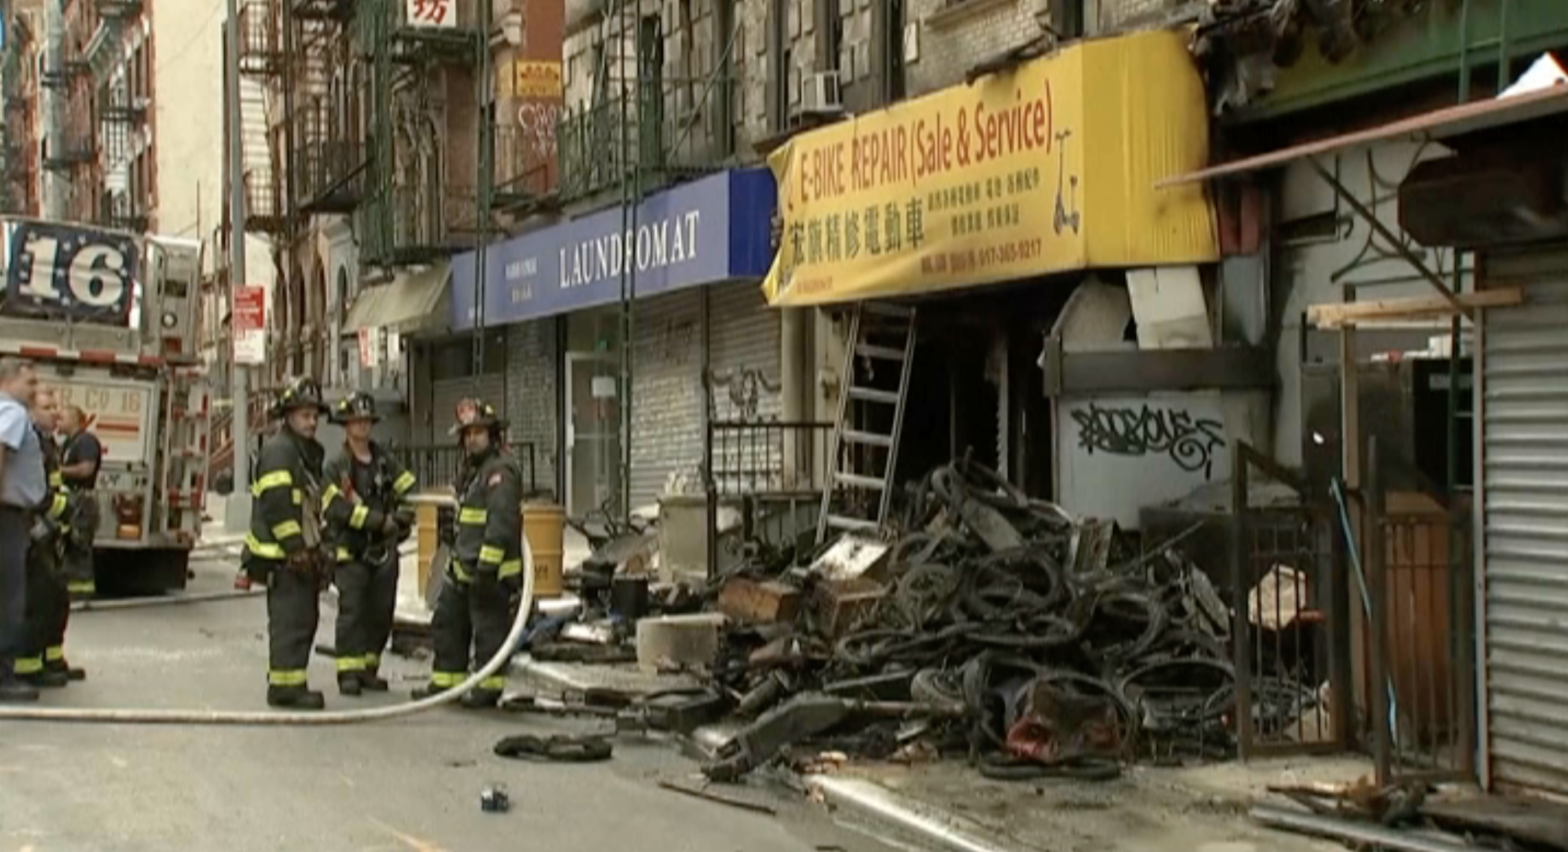 The store at 80 Madison Street was fined $US1,600 ($2,221) in 2022 for improper storage of lithium ion batteries, but remained open and operational.  (Screenshot: WABC-TV / Gizmodo, AP)